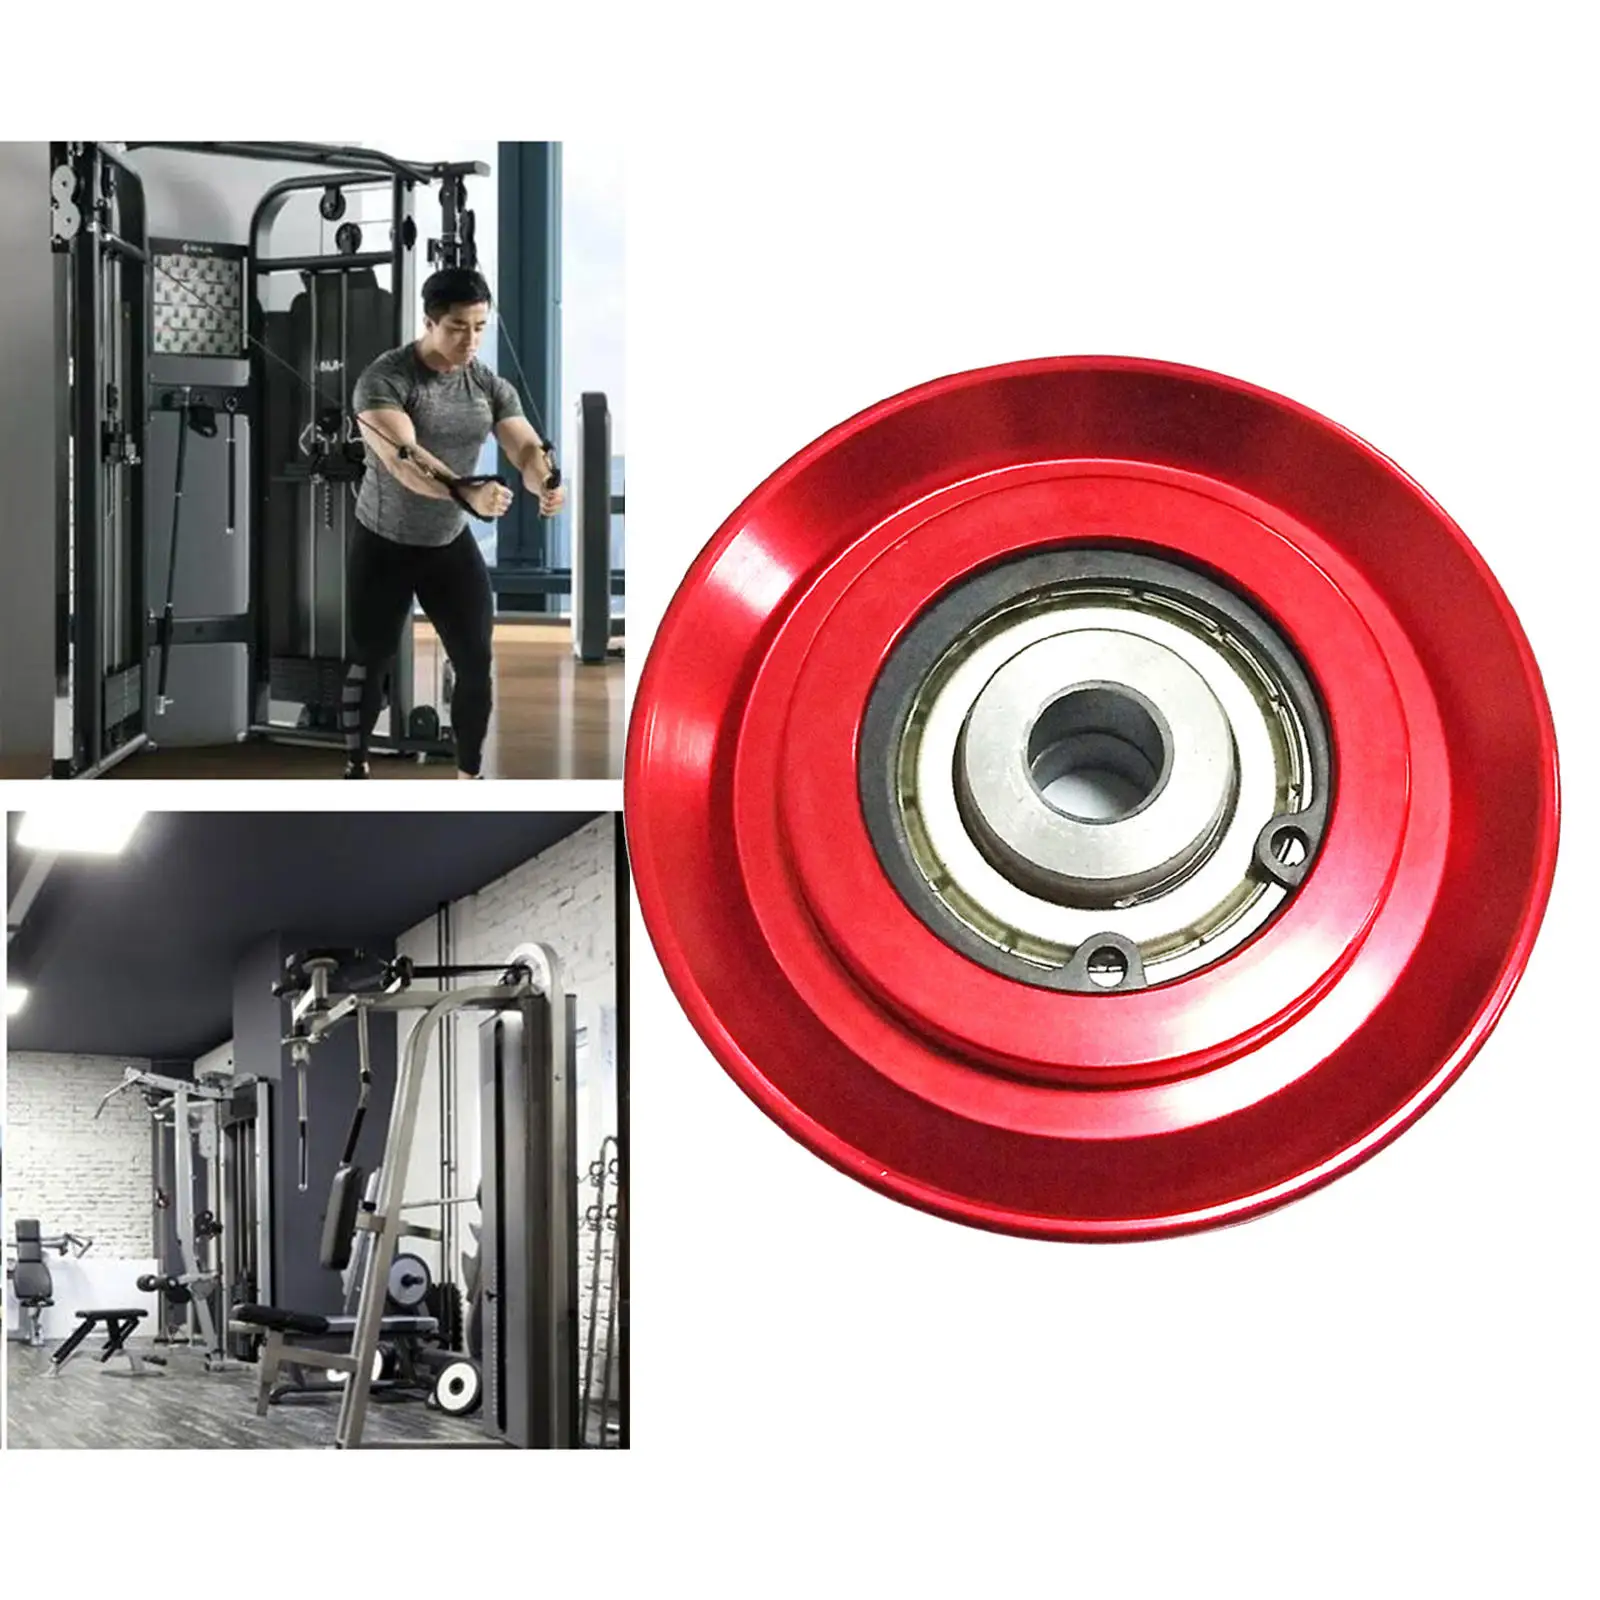 73mm Bearing Pulley Aluminium Alloy Universal for Fitness Equipment Replacement Part